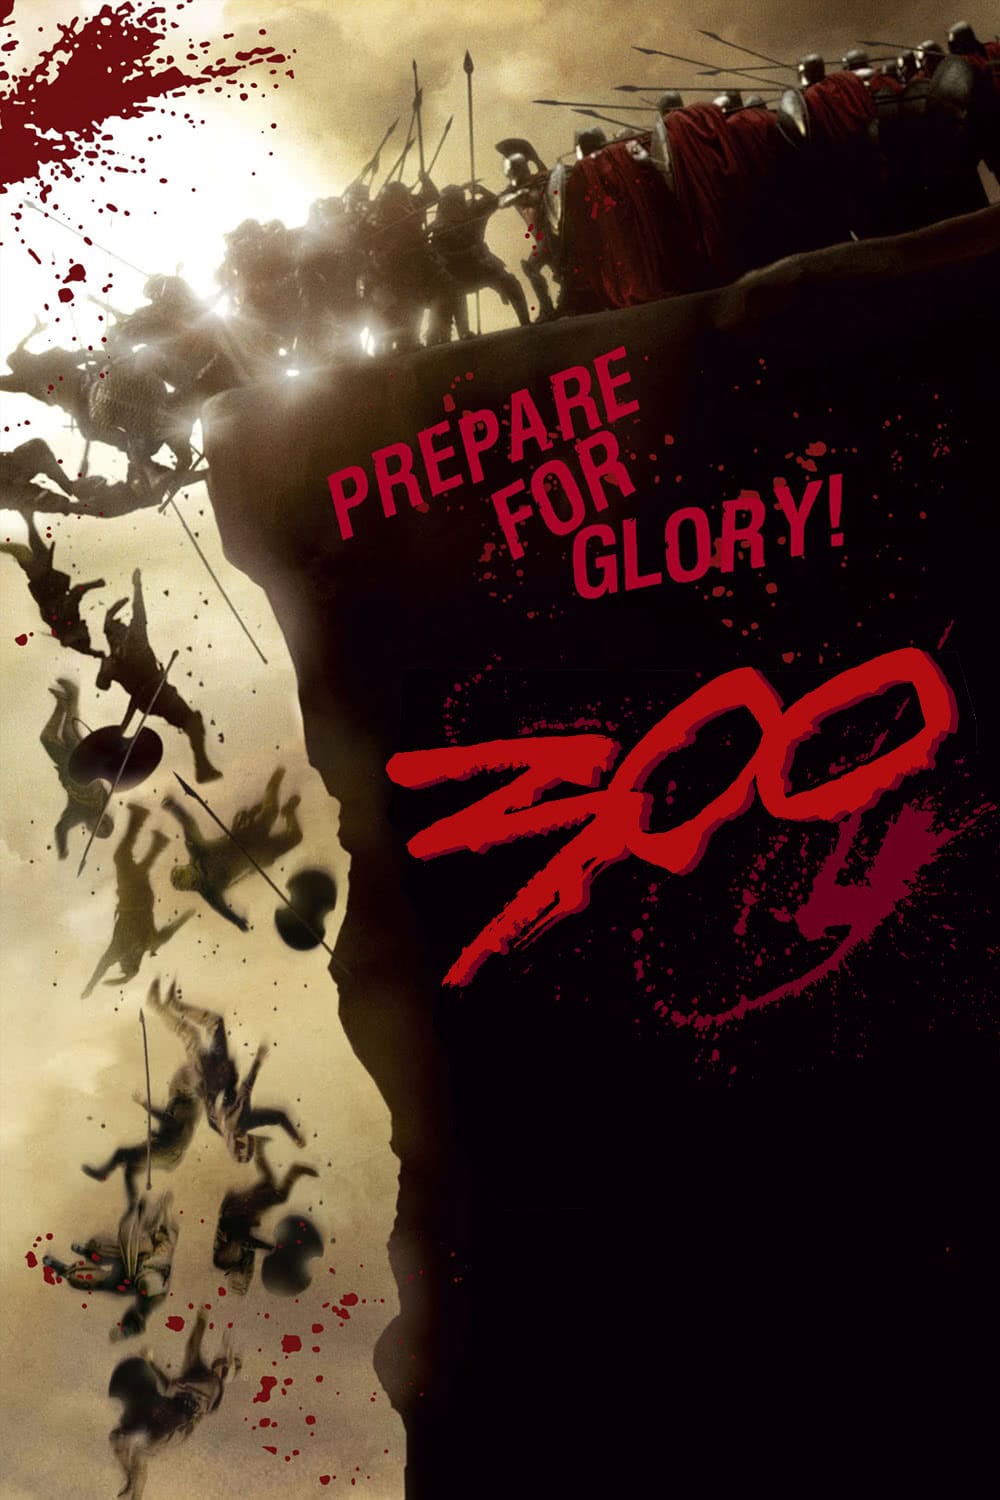 300 + Rambo 4 | Double Feature
